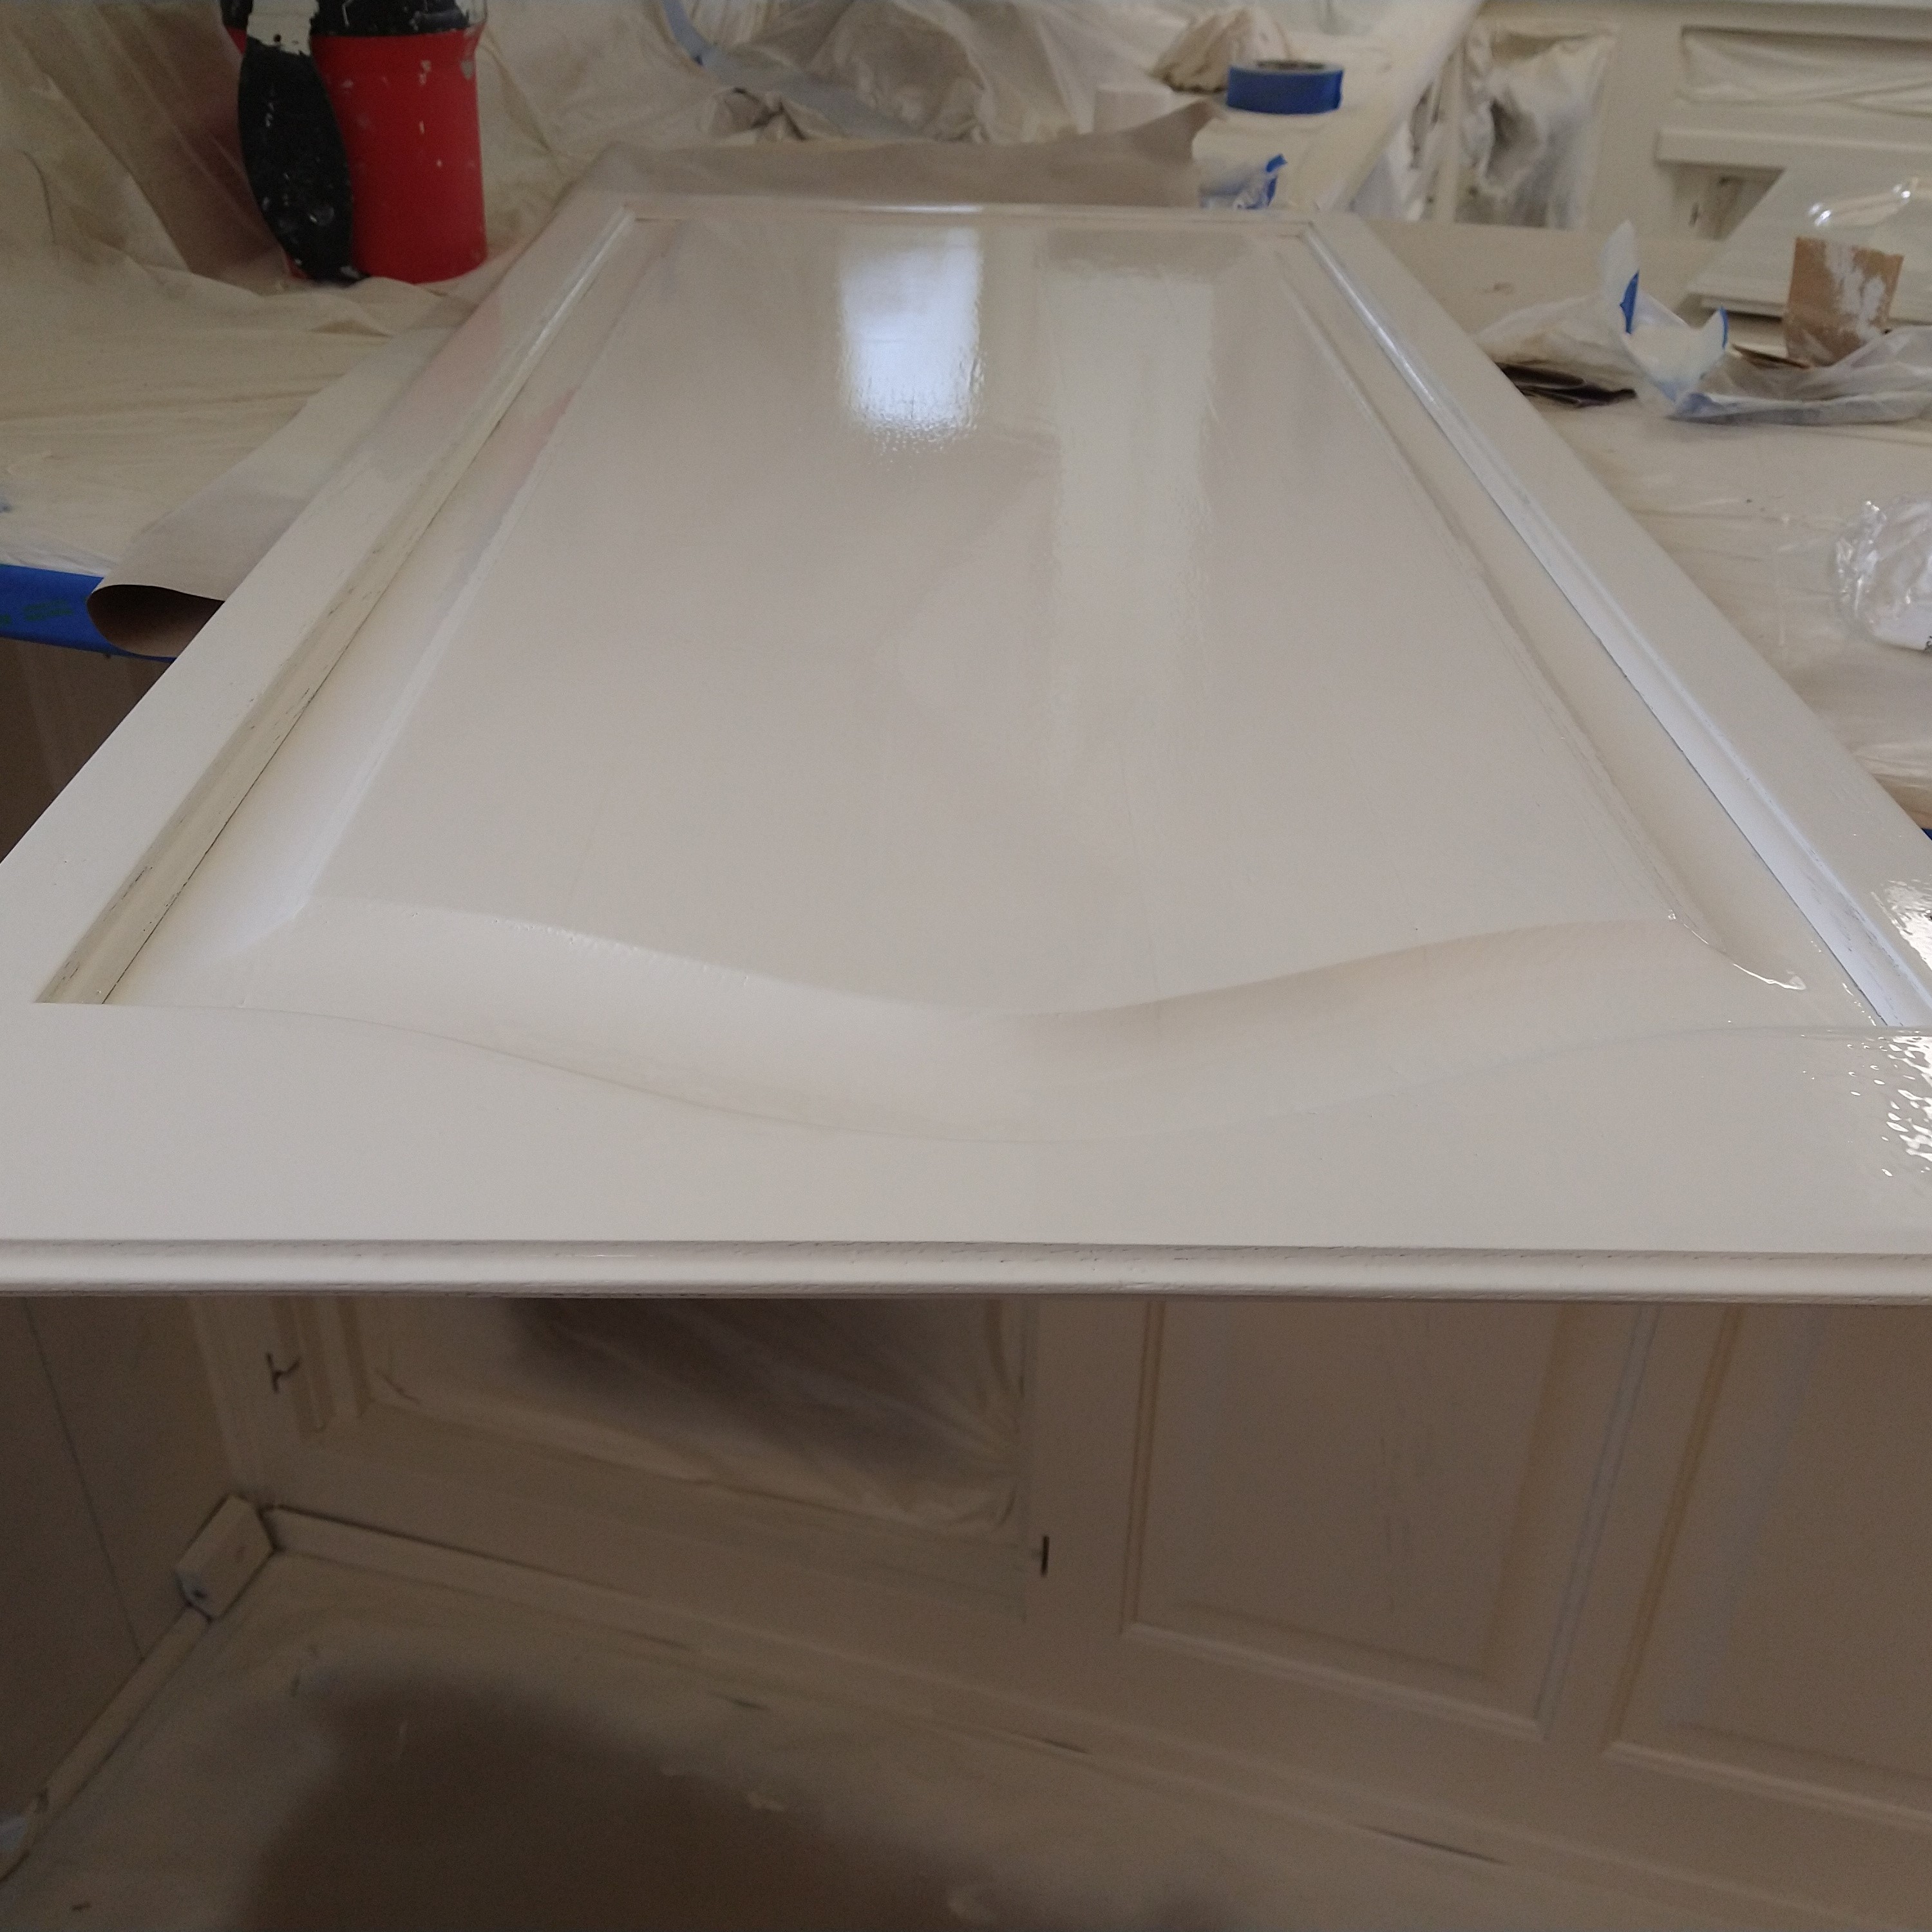 Large Kitchen Door Painted and Drying